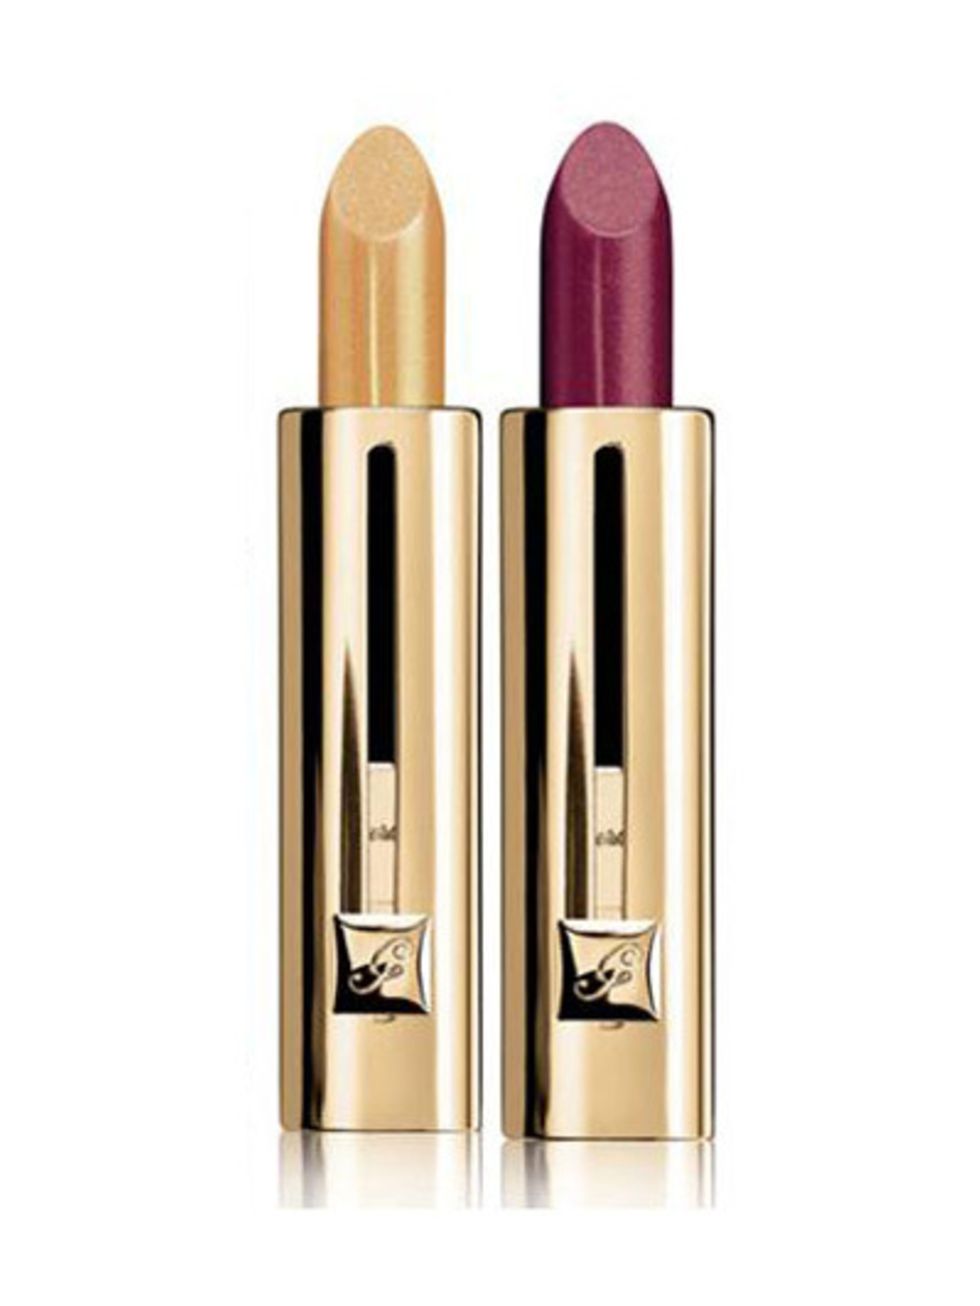 Brown, Liquid, Lipstick, Cosmetics, Peach, Tints and shades, Beige, Maroon, Material property, Silver, 